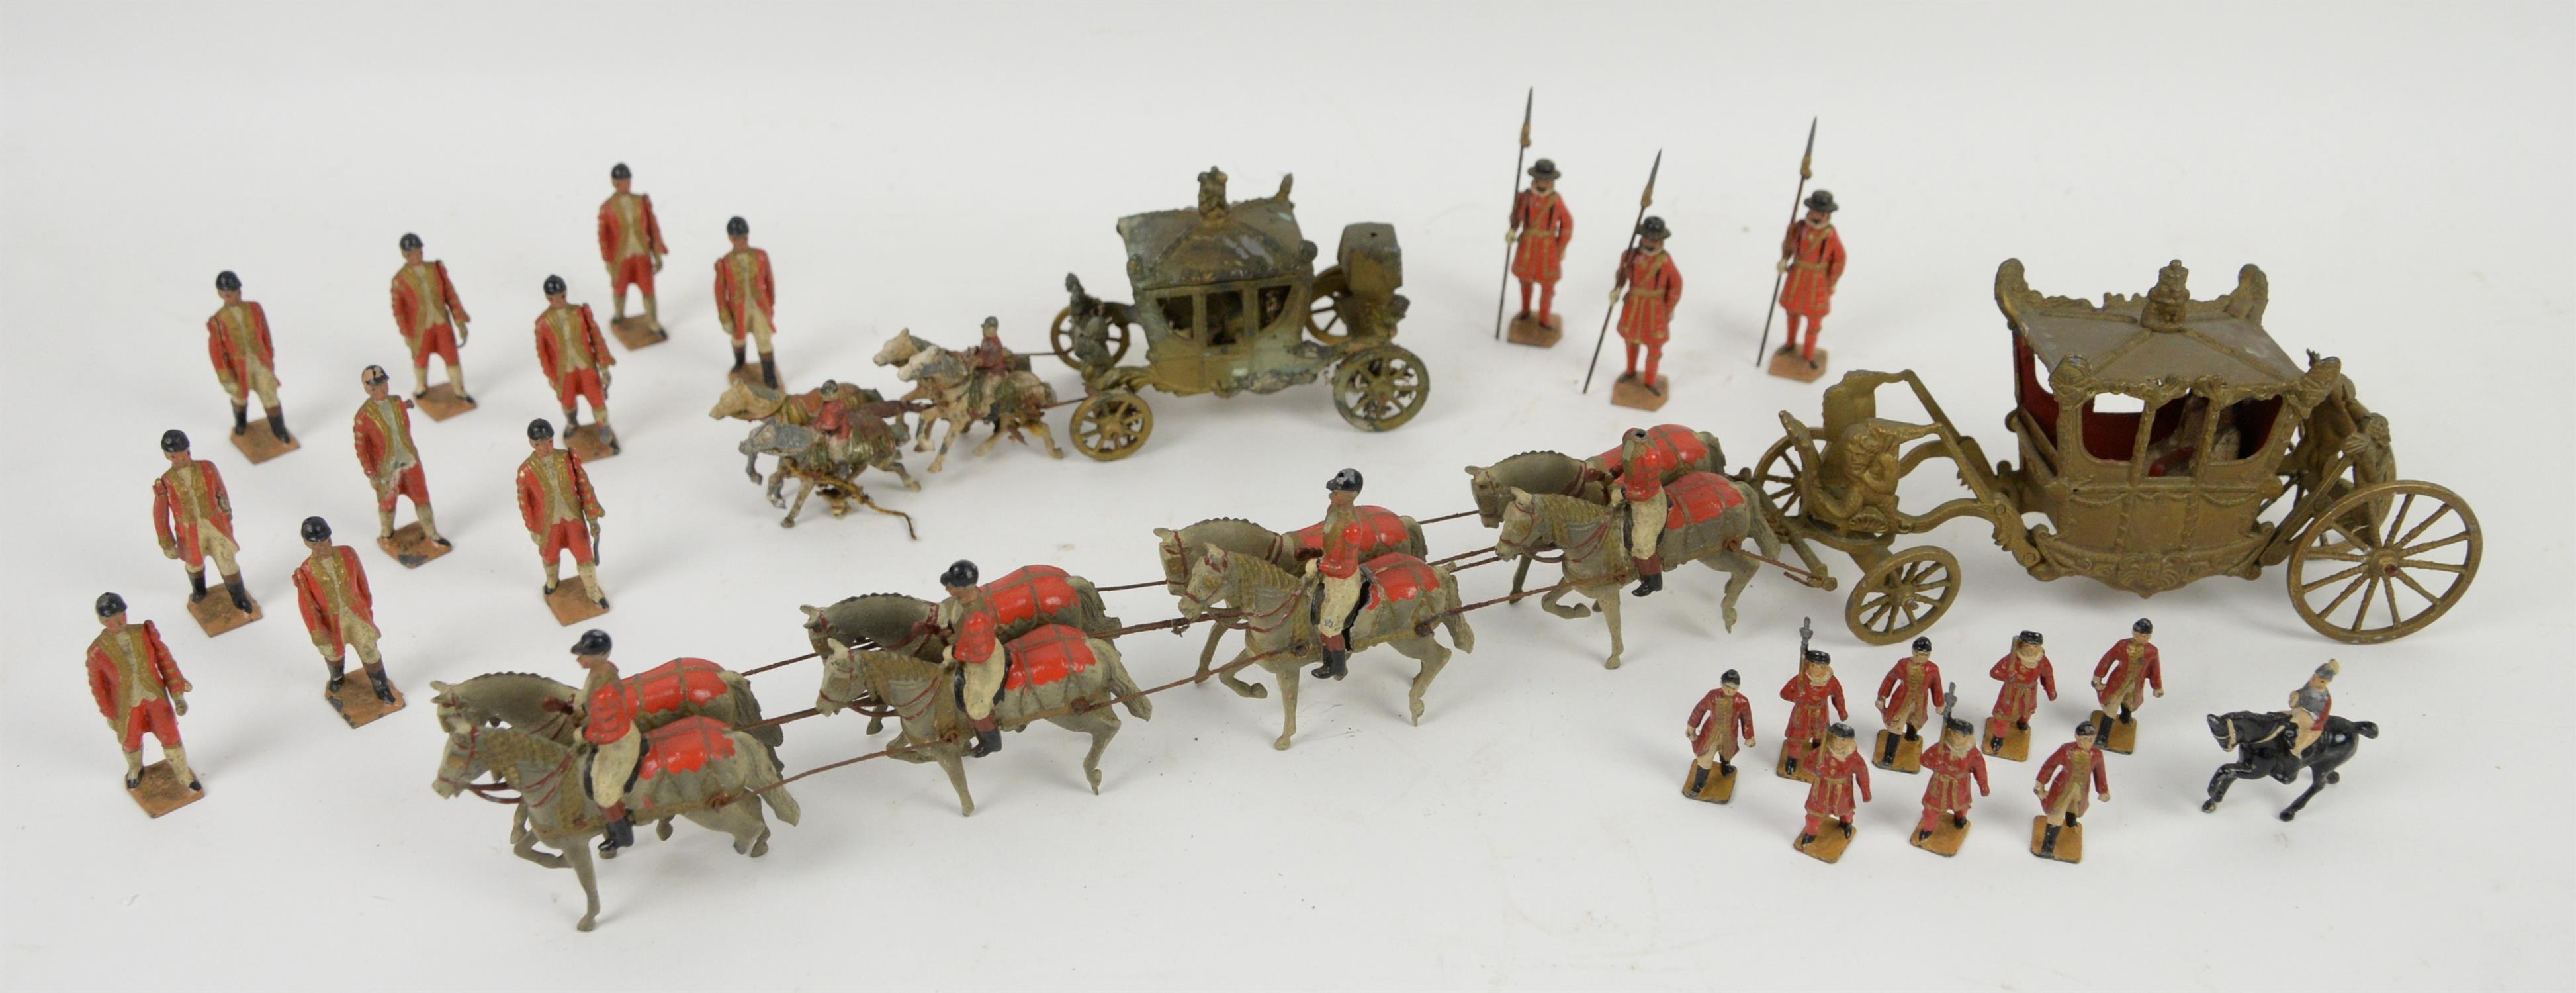 Britains cast metal model State Coach with attendants and a smaller scale Hill Co.